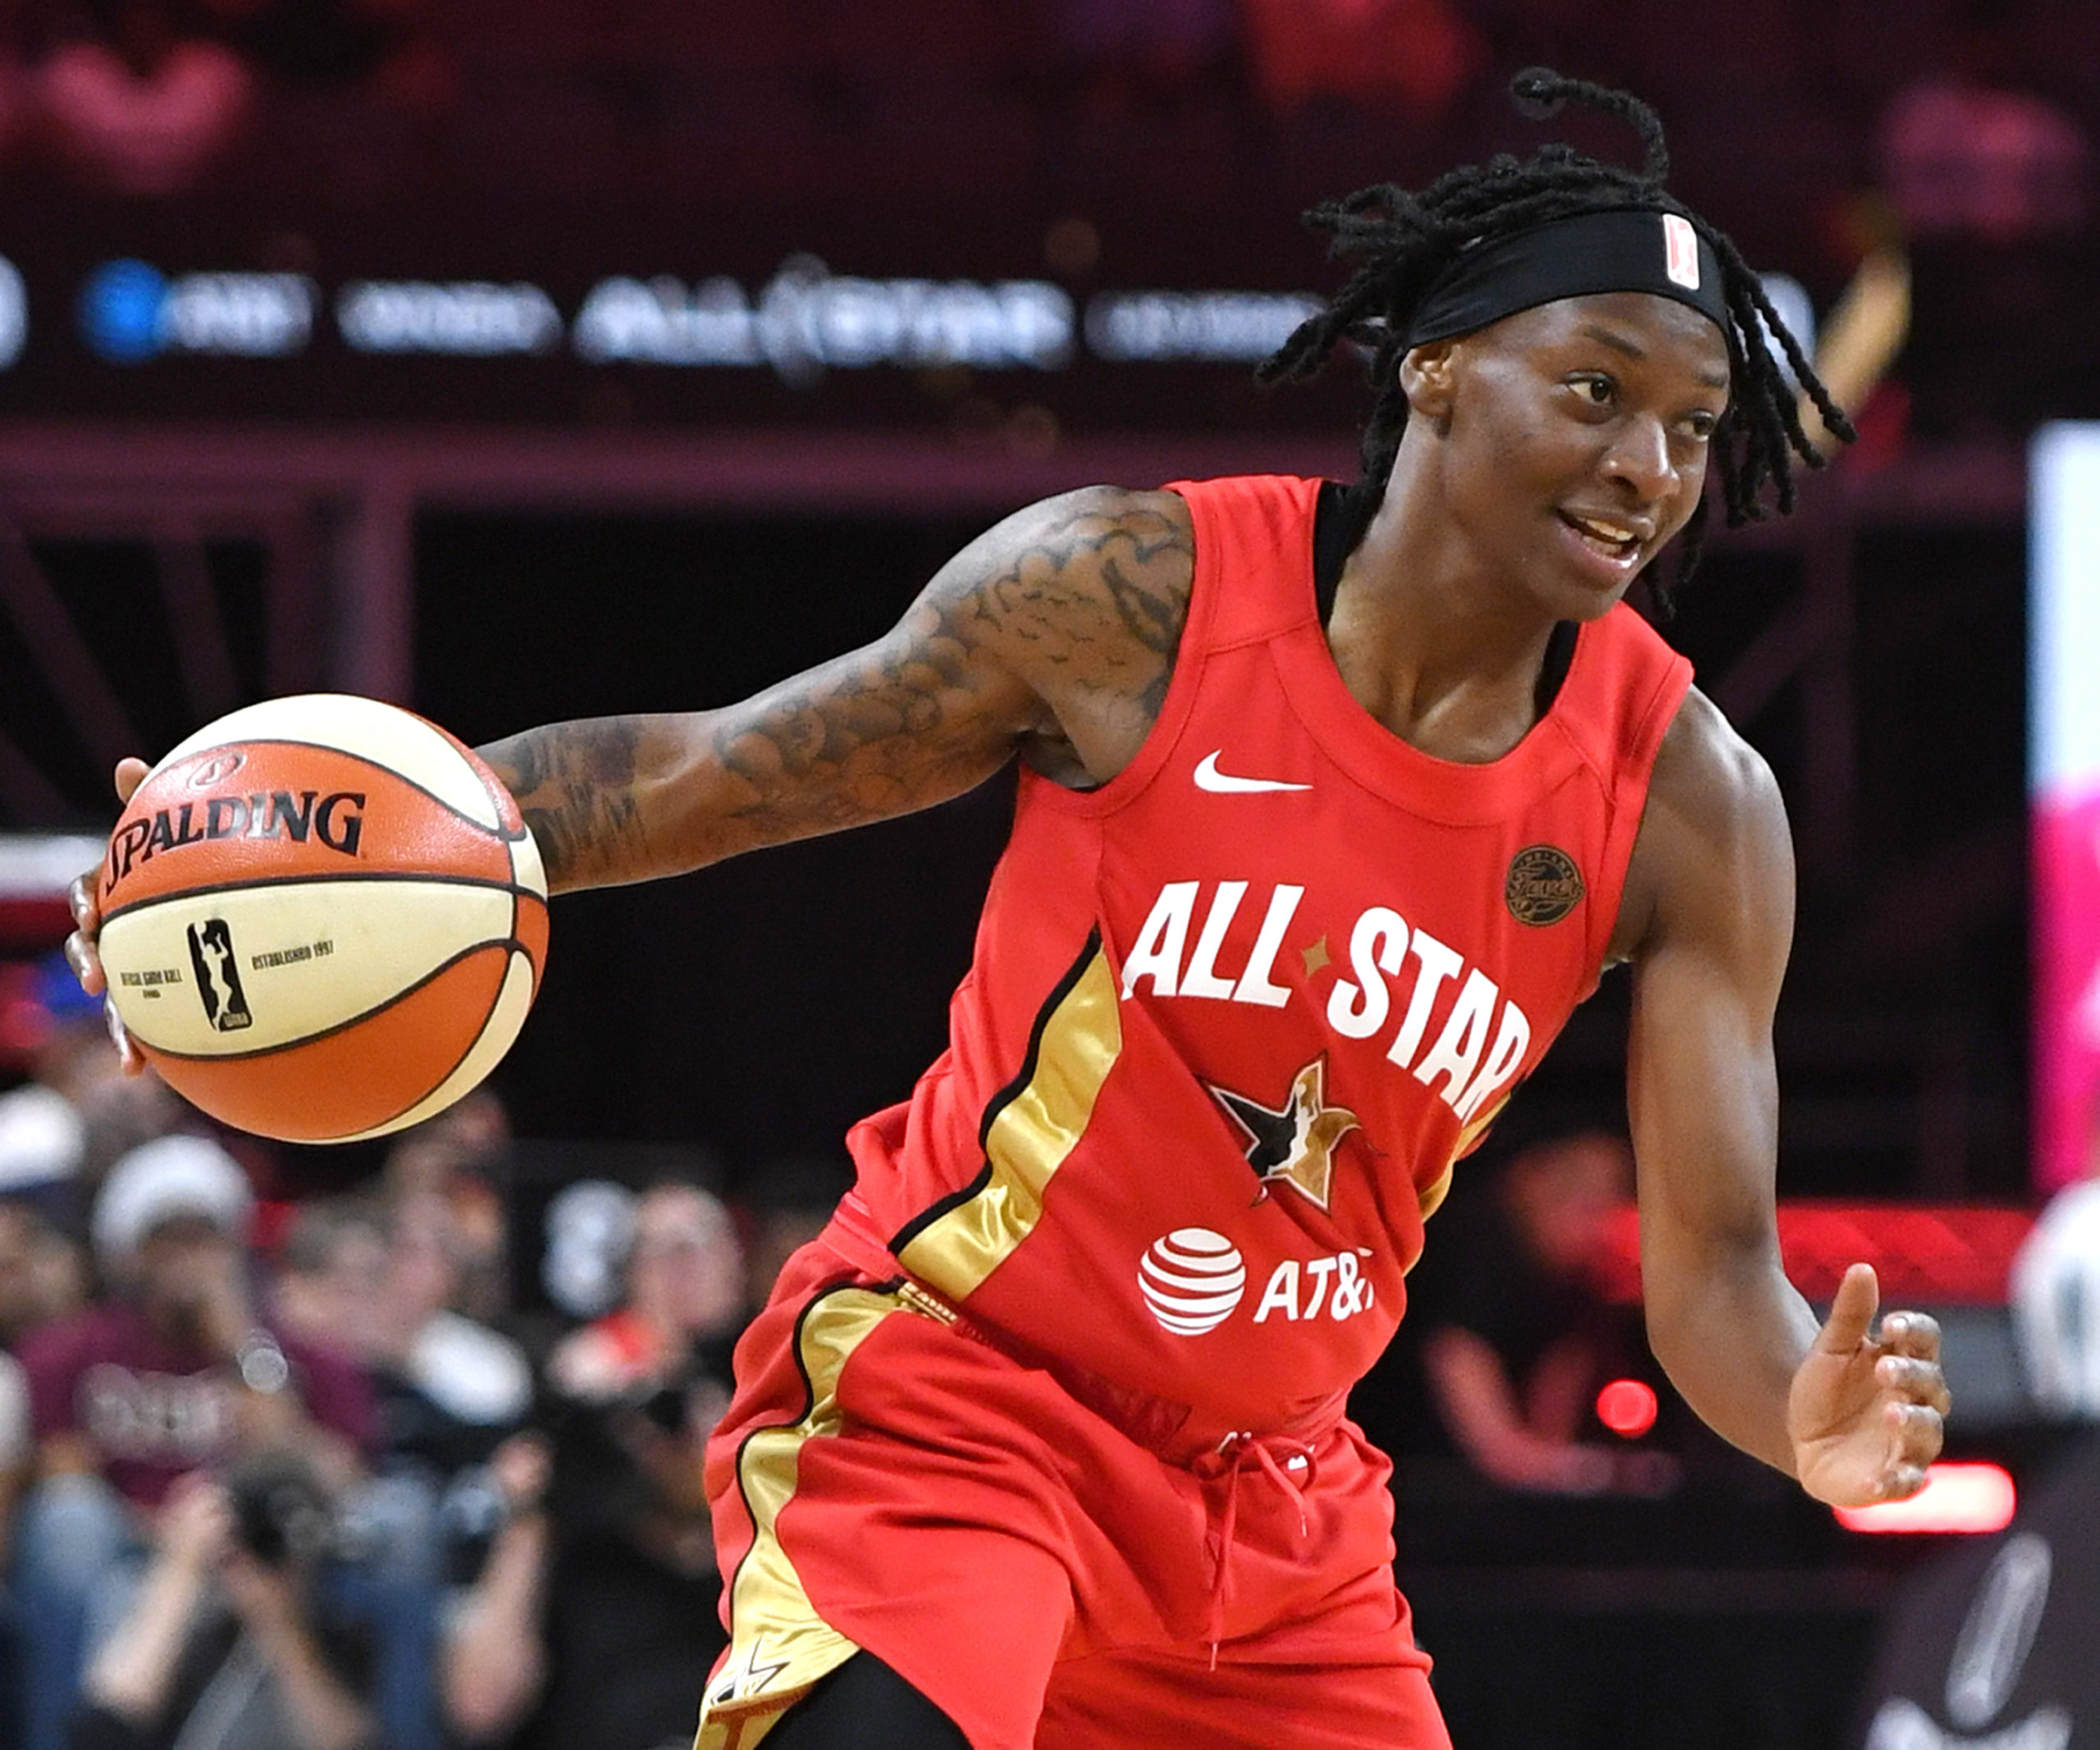 LAS VEGAS, NEVADA - JULY 27: Erica Wheeler #17 of Team Wilson brings the ball up the court against Team Delle Donne during the WNBA All-Star Game 2019 at the Mandalay Bay Events Center on July 27, 2019 in Las Vegas, Nevada. Team Wilson defeated Team Delle Donne 129-126. Ethan Miller/Getty Images